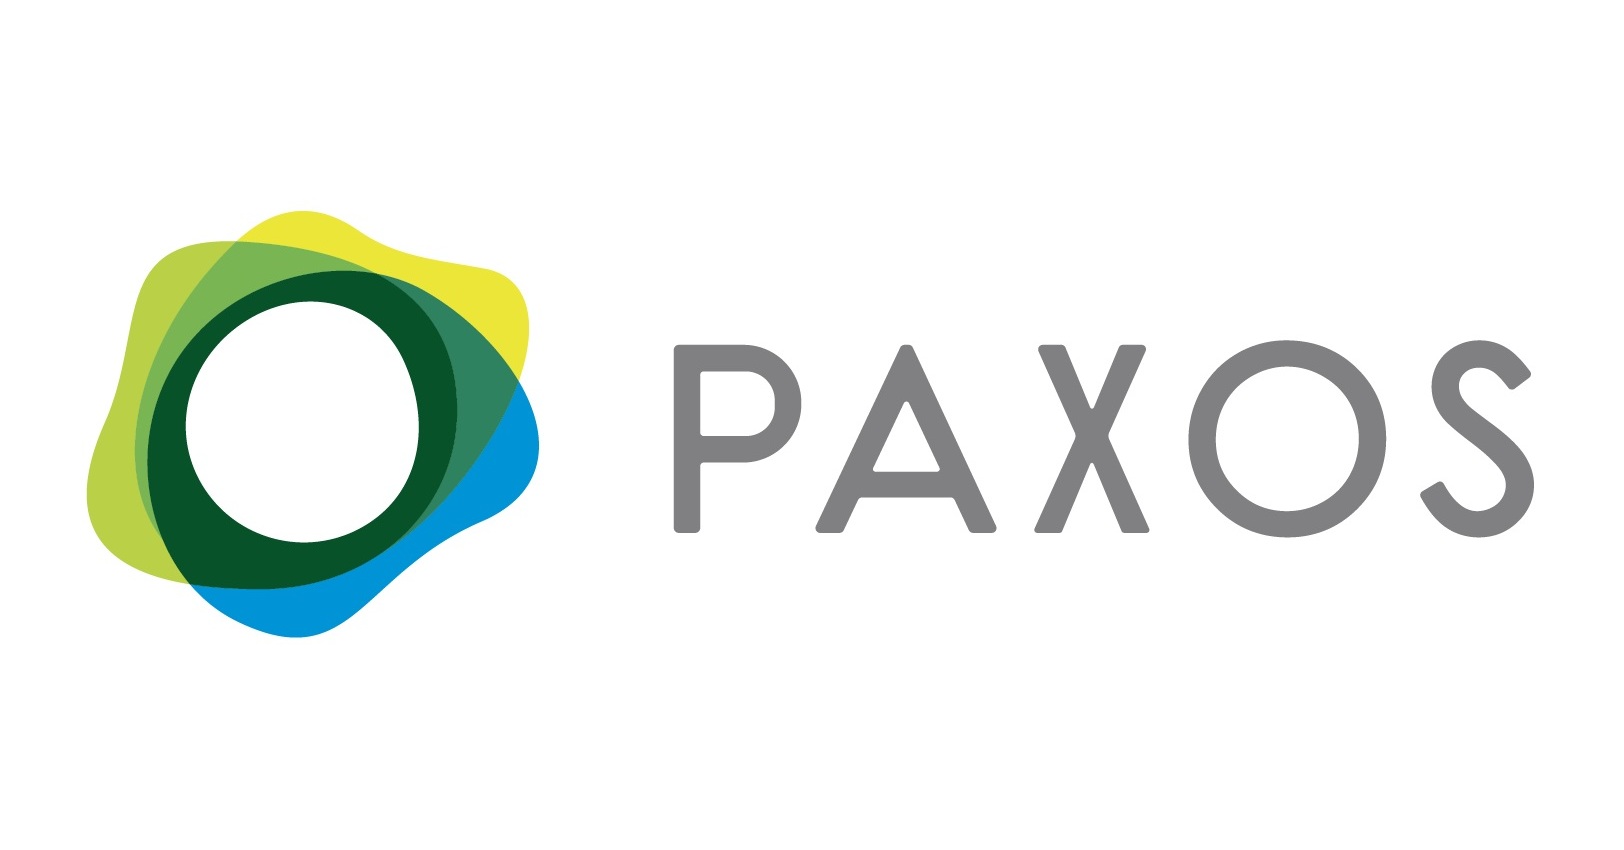 Paxos Receives In Principle Approvals from the Financial Services Regulatory Authority to Issue Stablecoins and Conduct Digital Asset Services from the Abu Dhabi Global Market